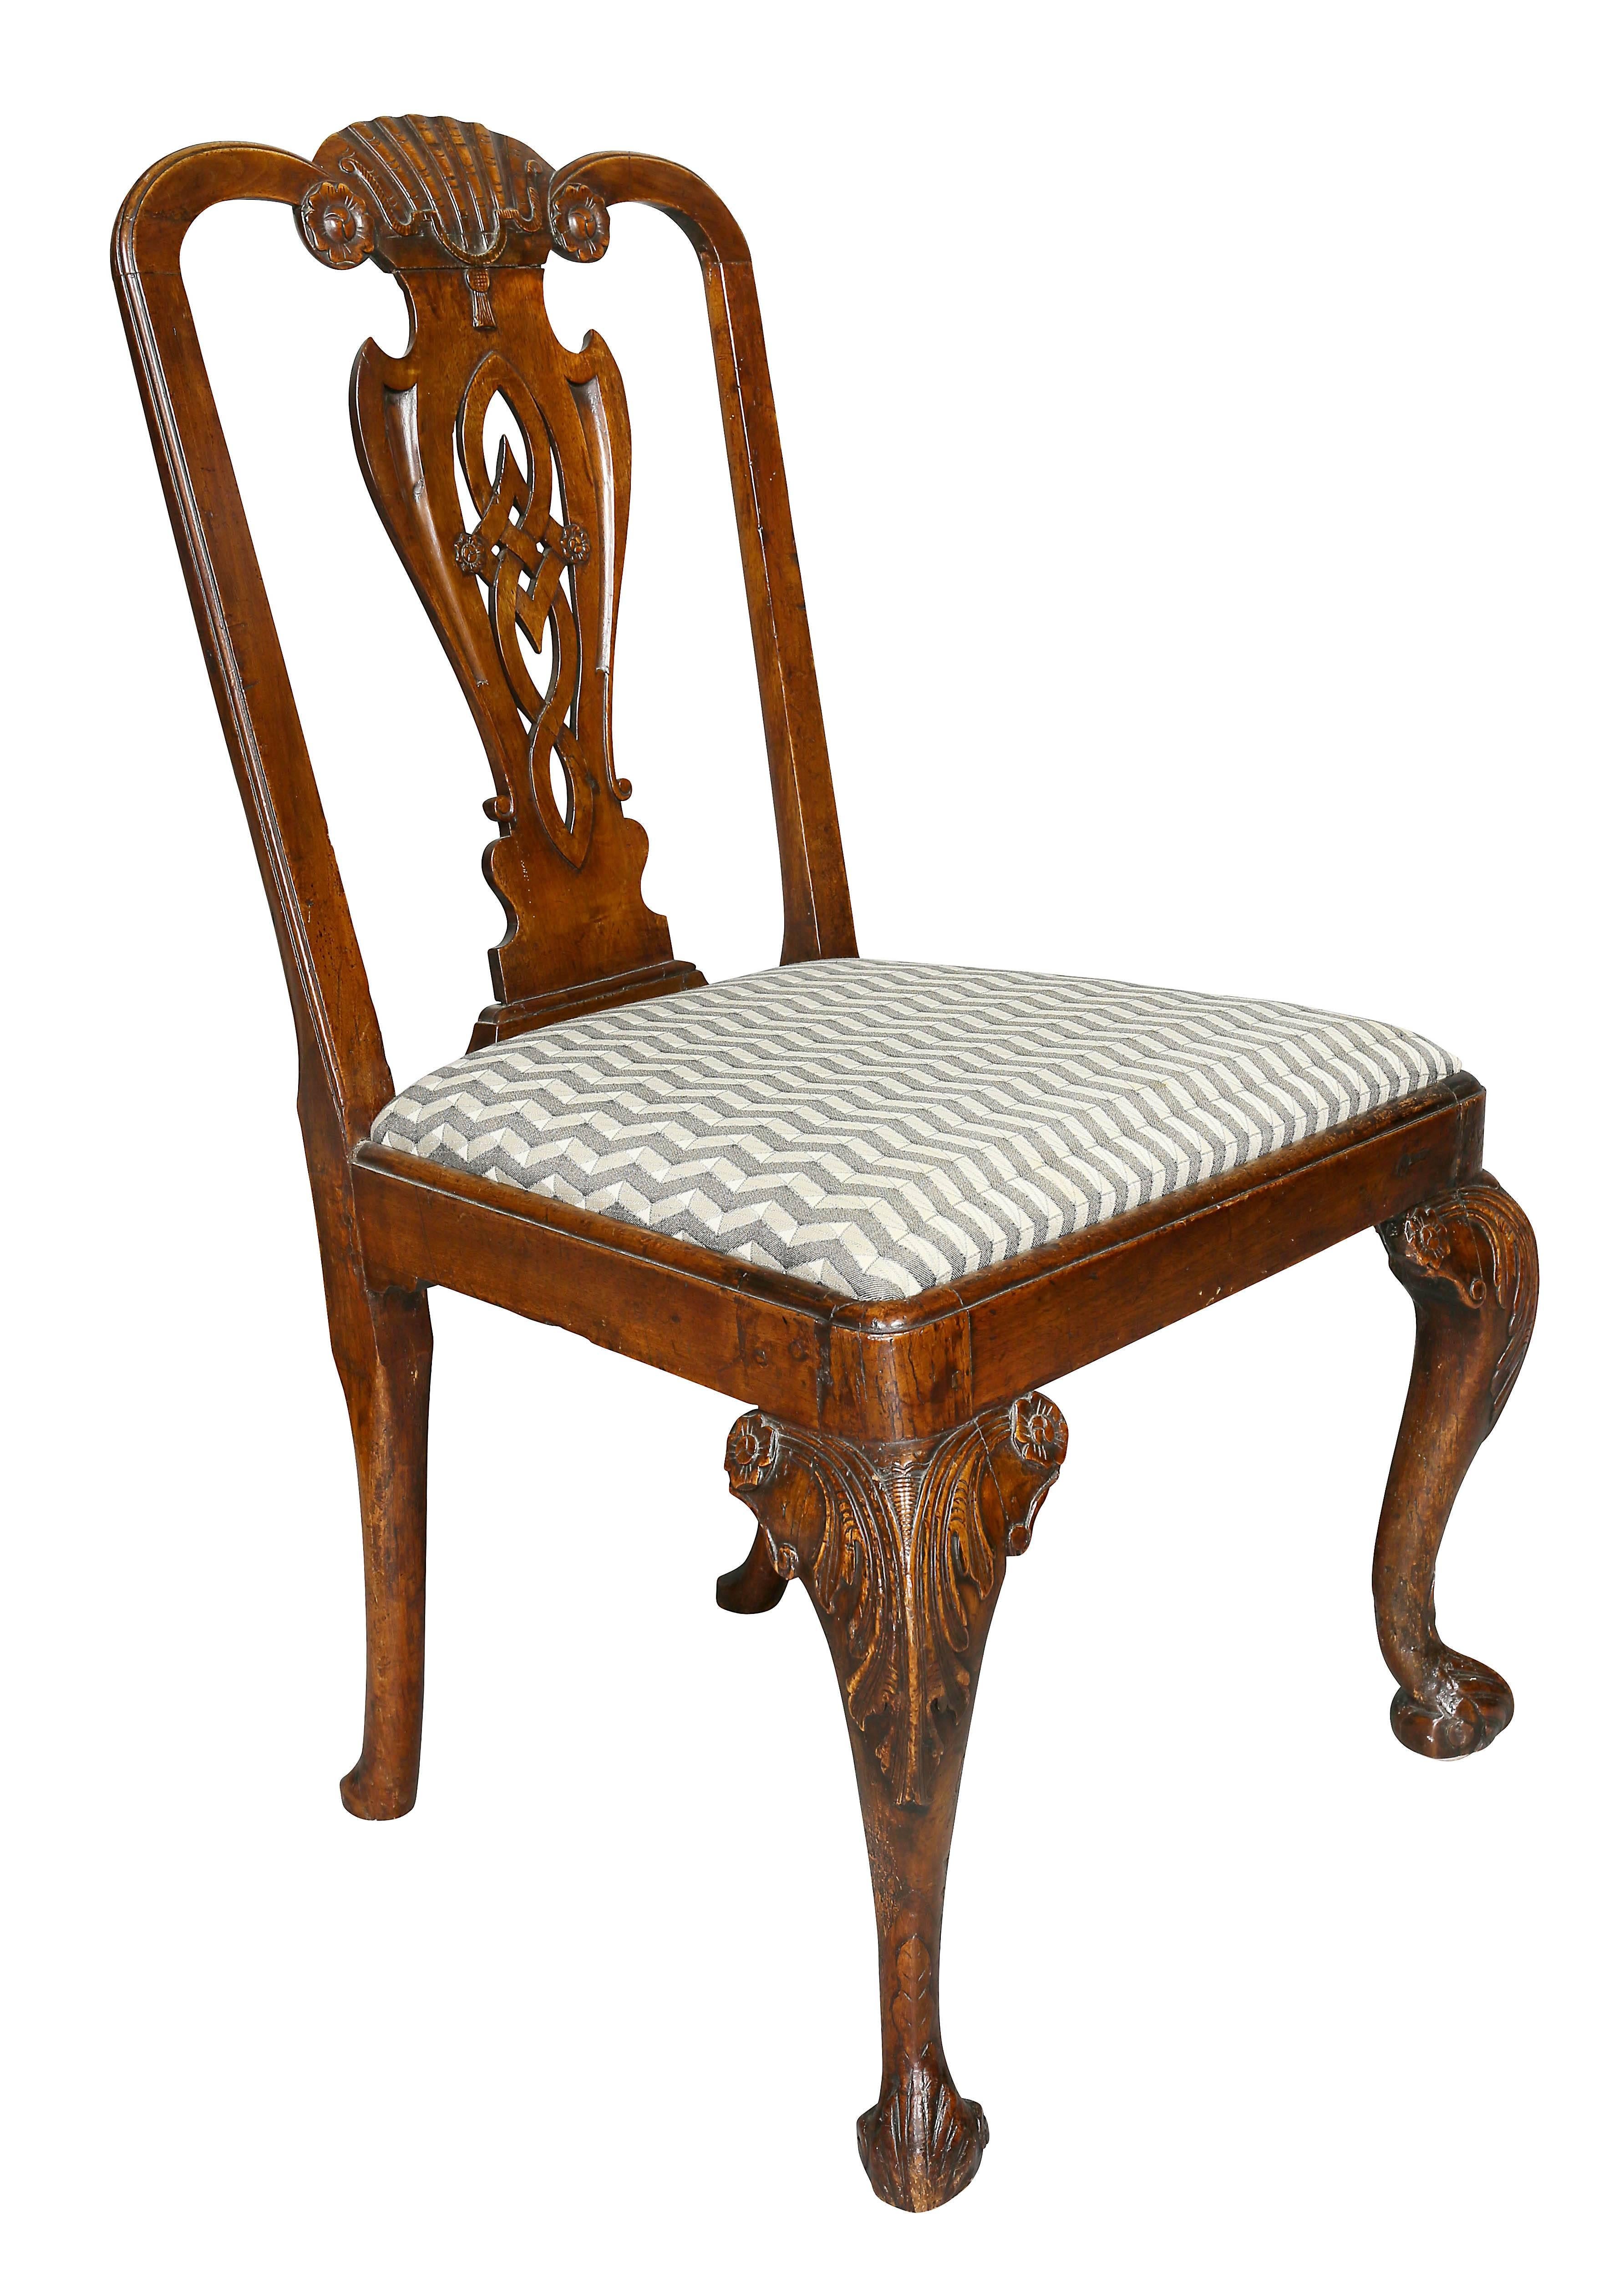 With carved shell and tassel crest rail over a pierced vasiform splat, drop in seat, raised on cabriole legs and scroll feet.